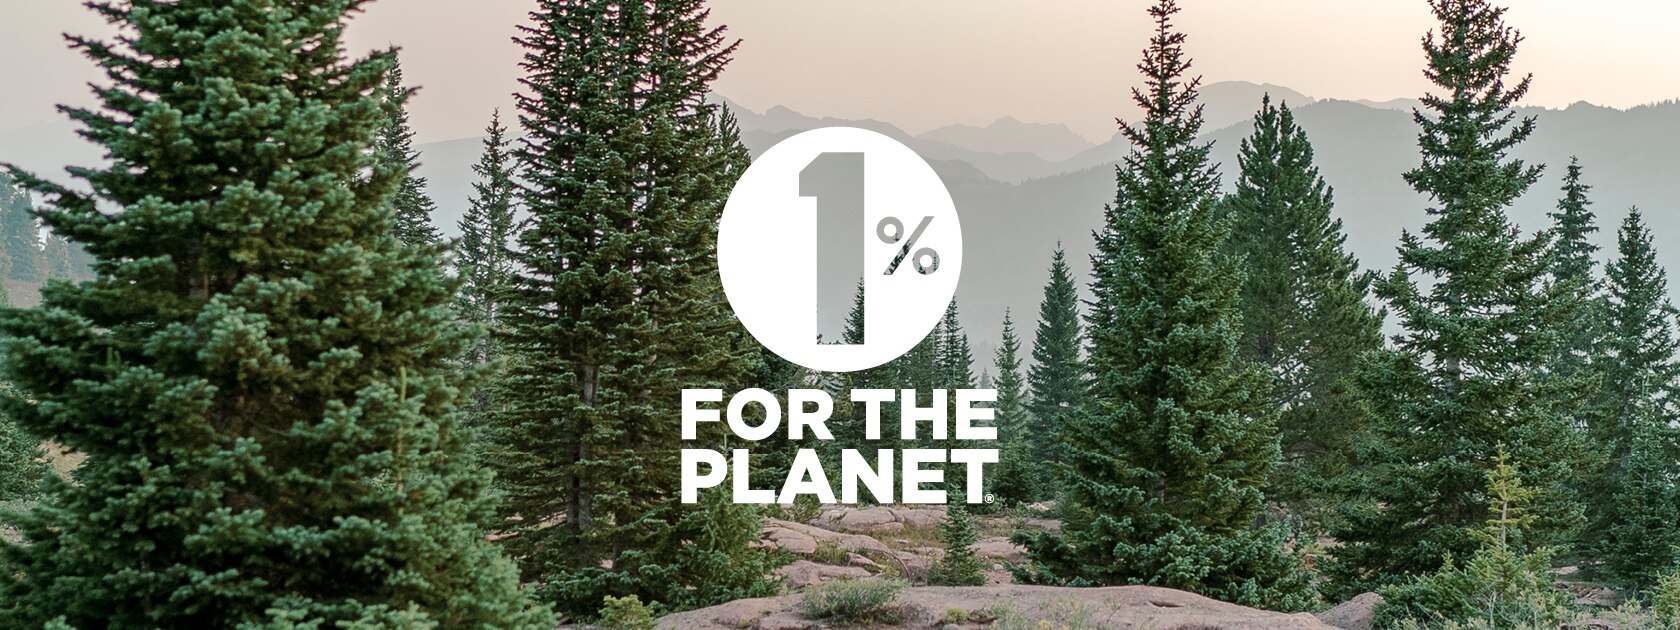 pine forest with mountain in background overlaid by one percent for the planet icon